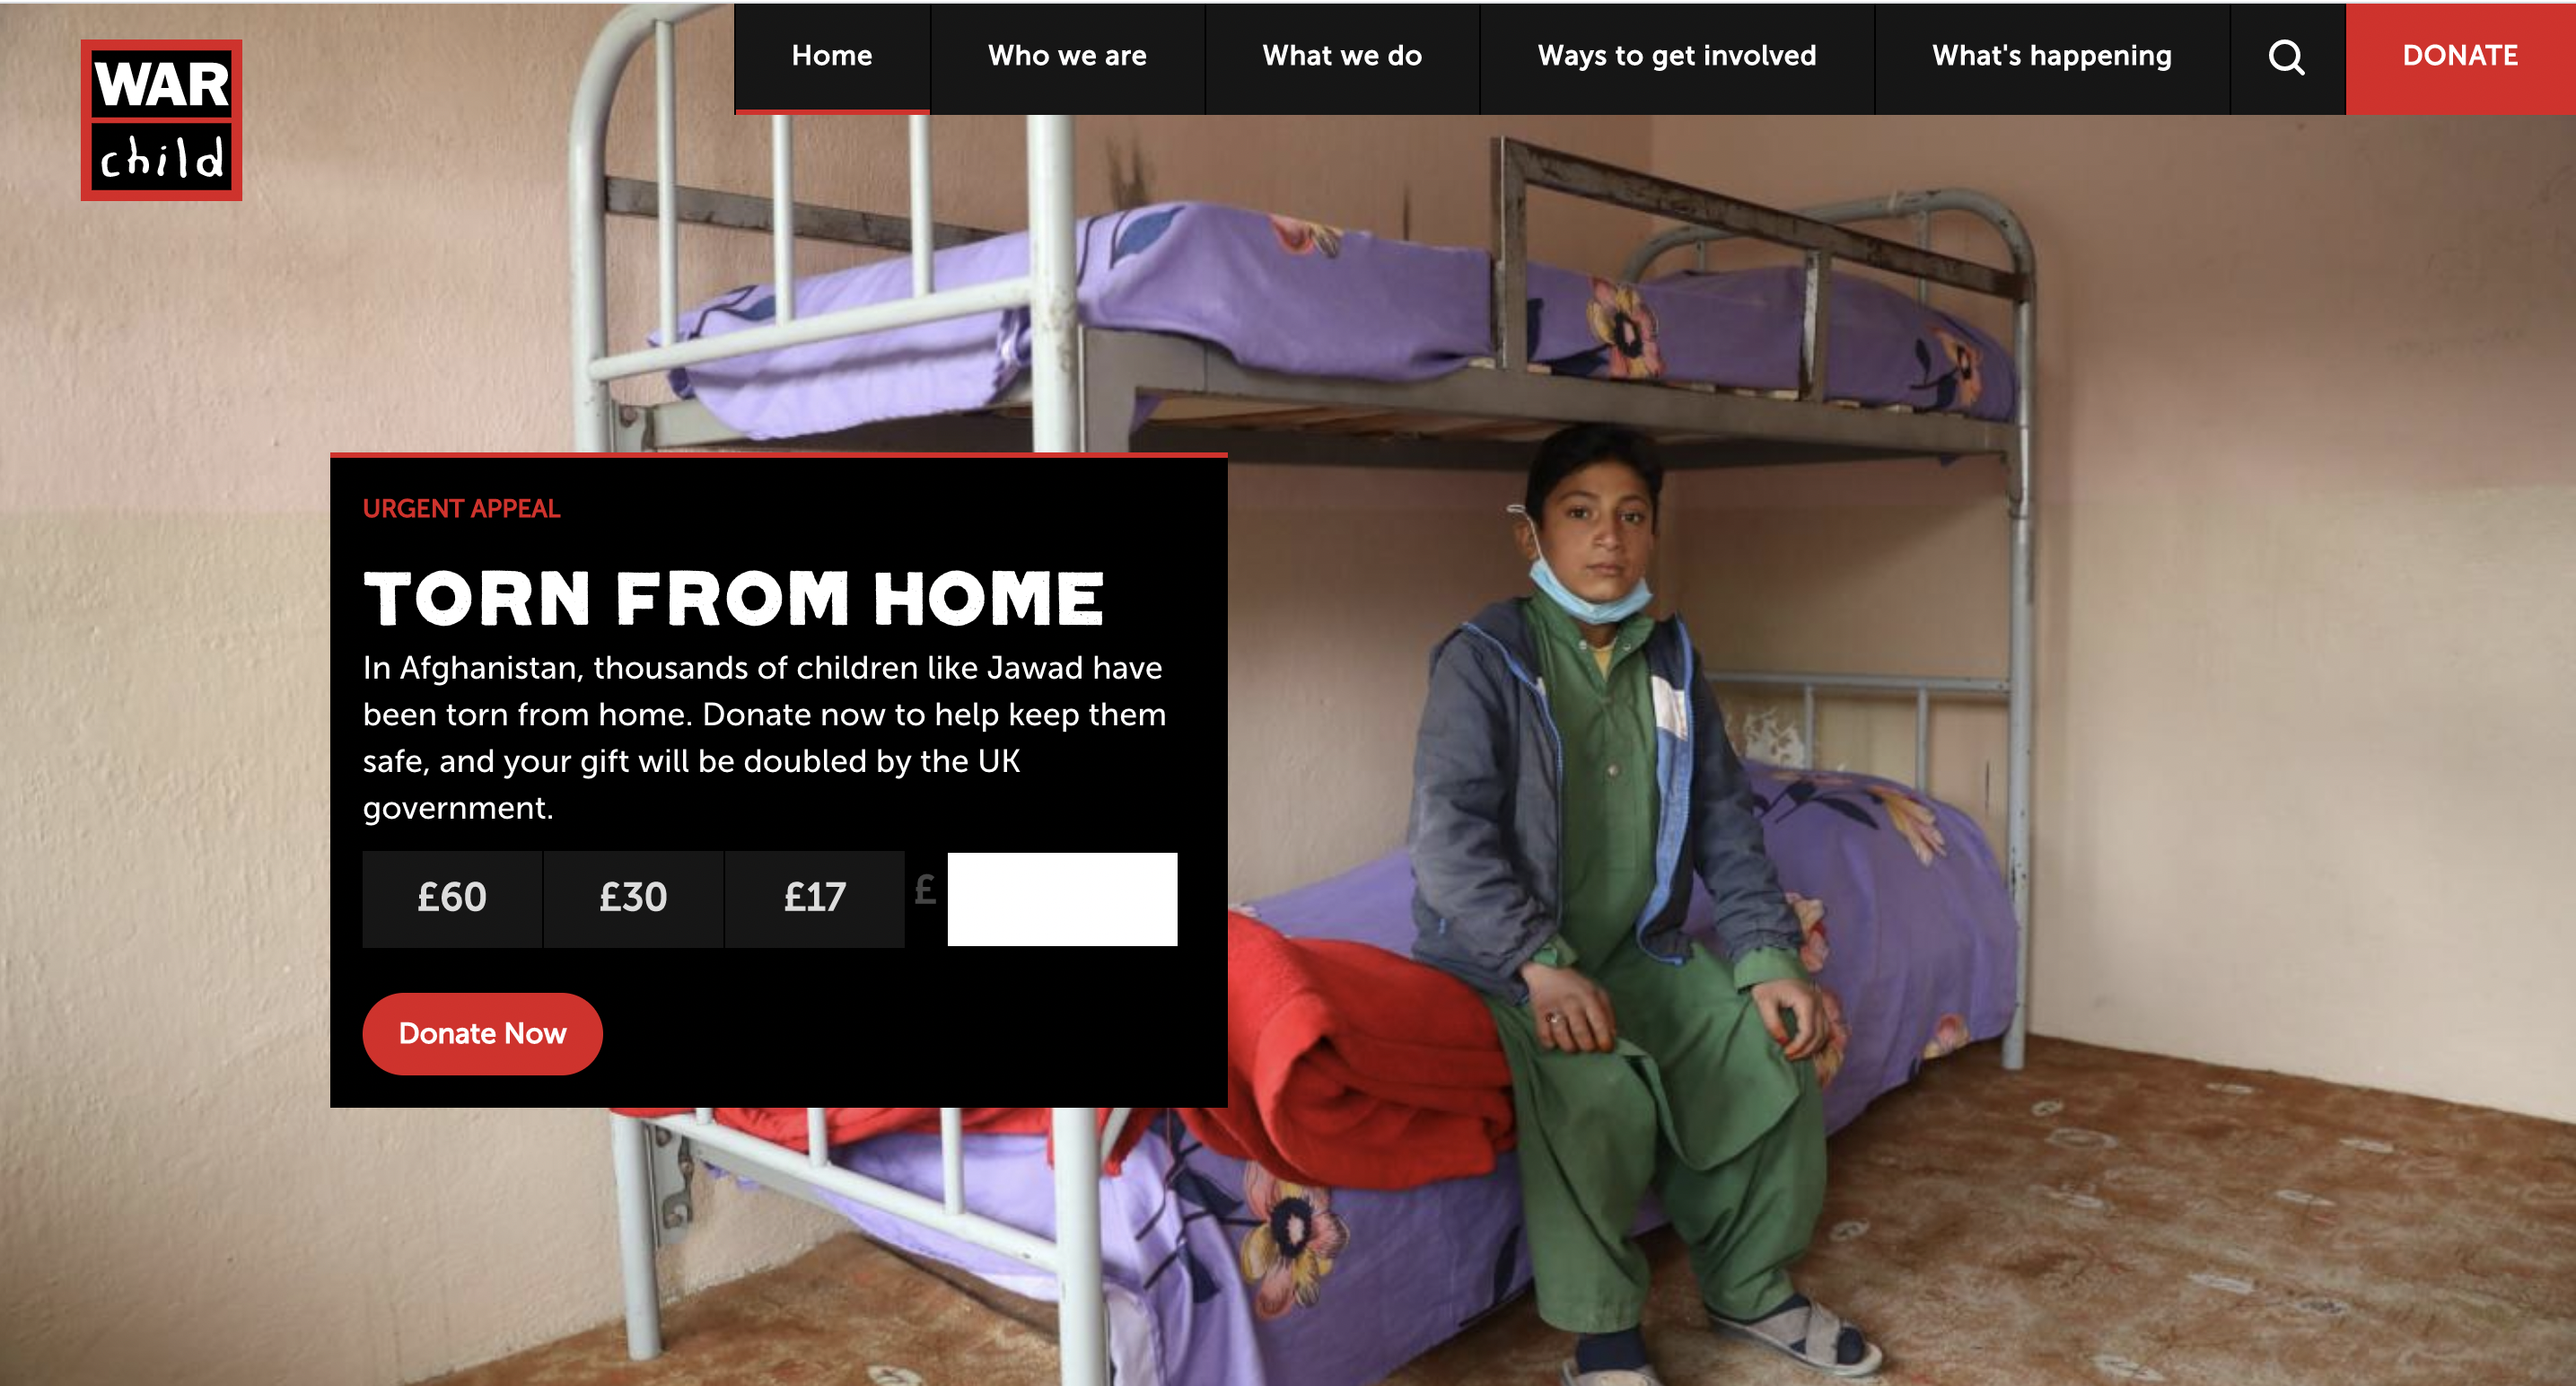 War Child website showing child sitting on bunk bed with donation request overlay